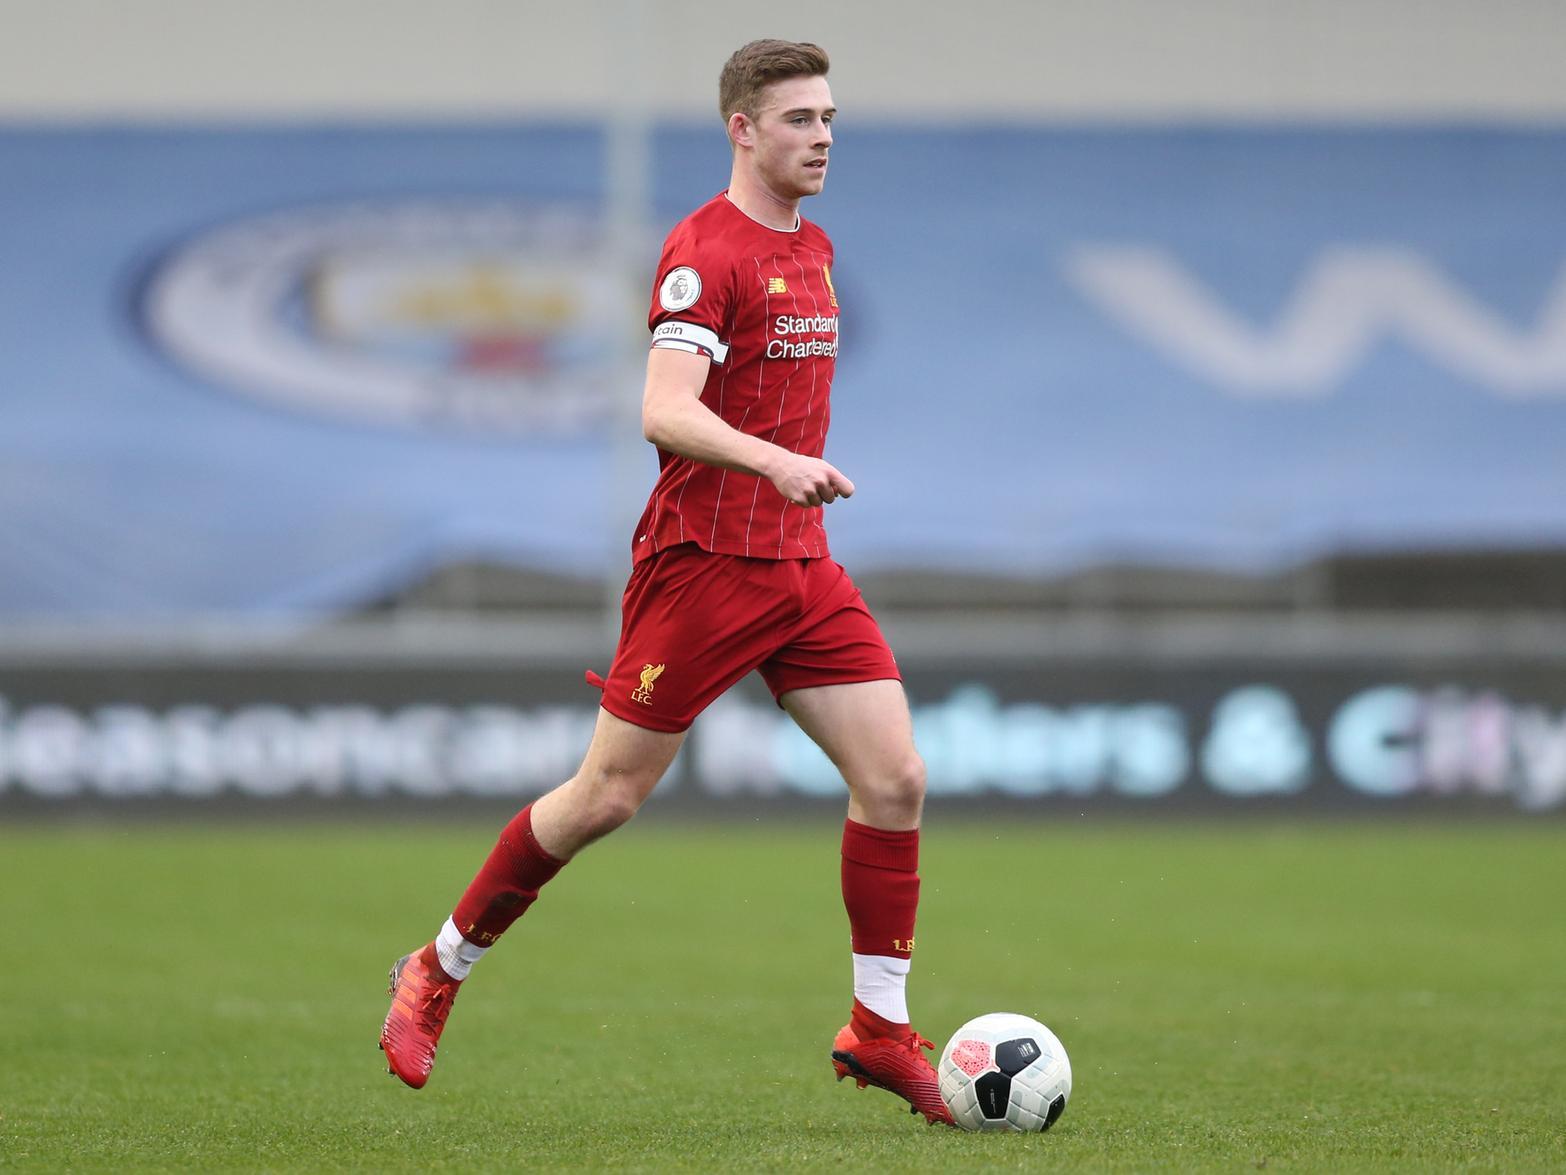 The 20-year-old former Falkirk left-back had made just one senior appearance for Liverpools first team in the Carabao Cup. Could do with regular game time.